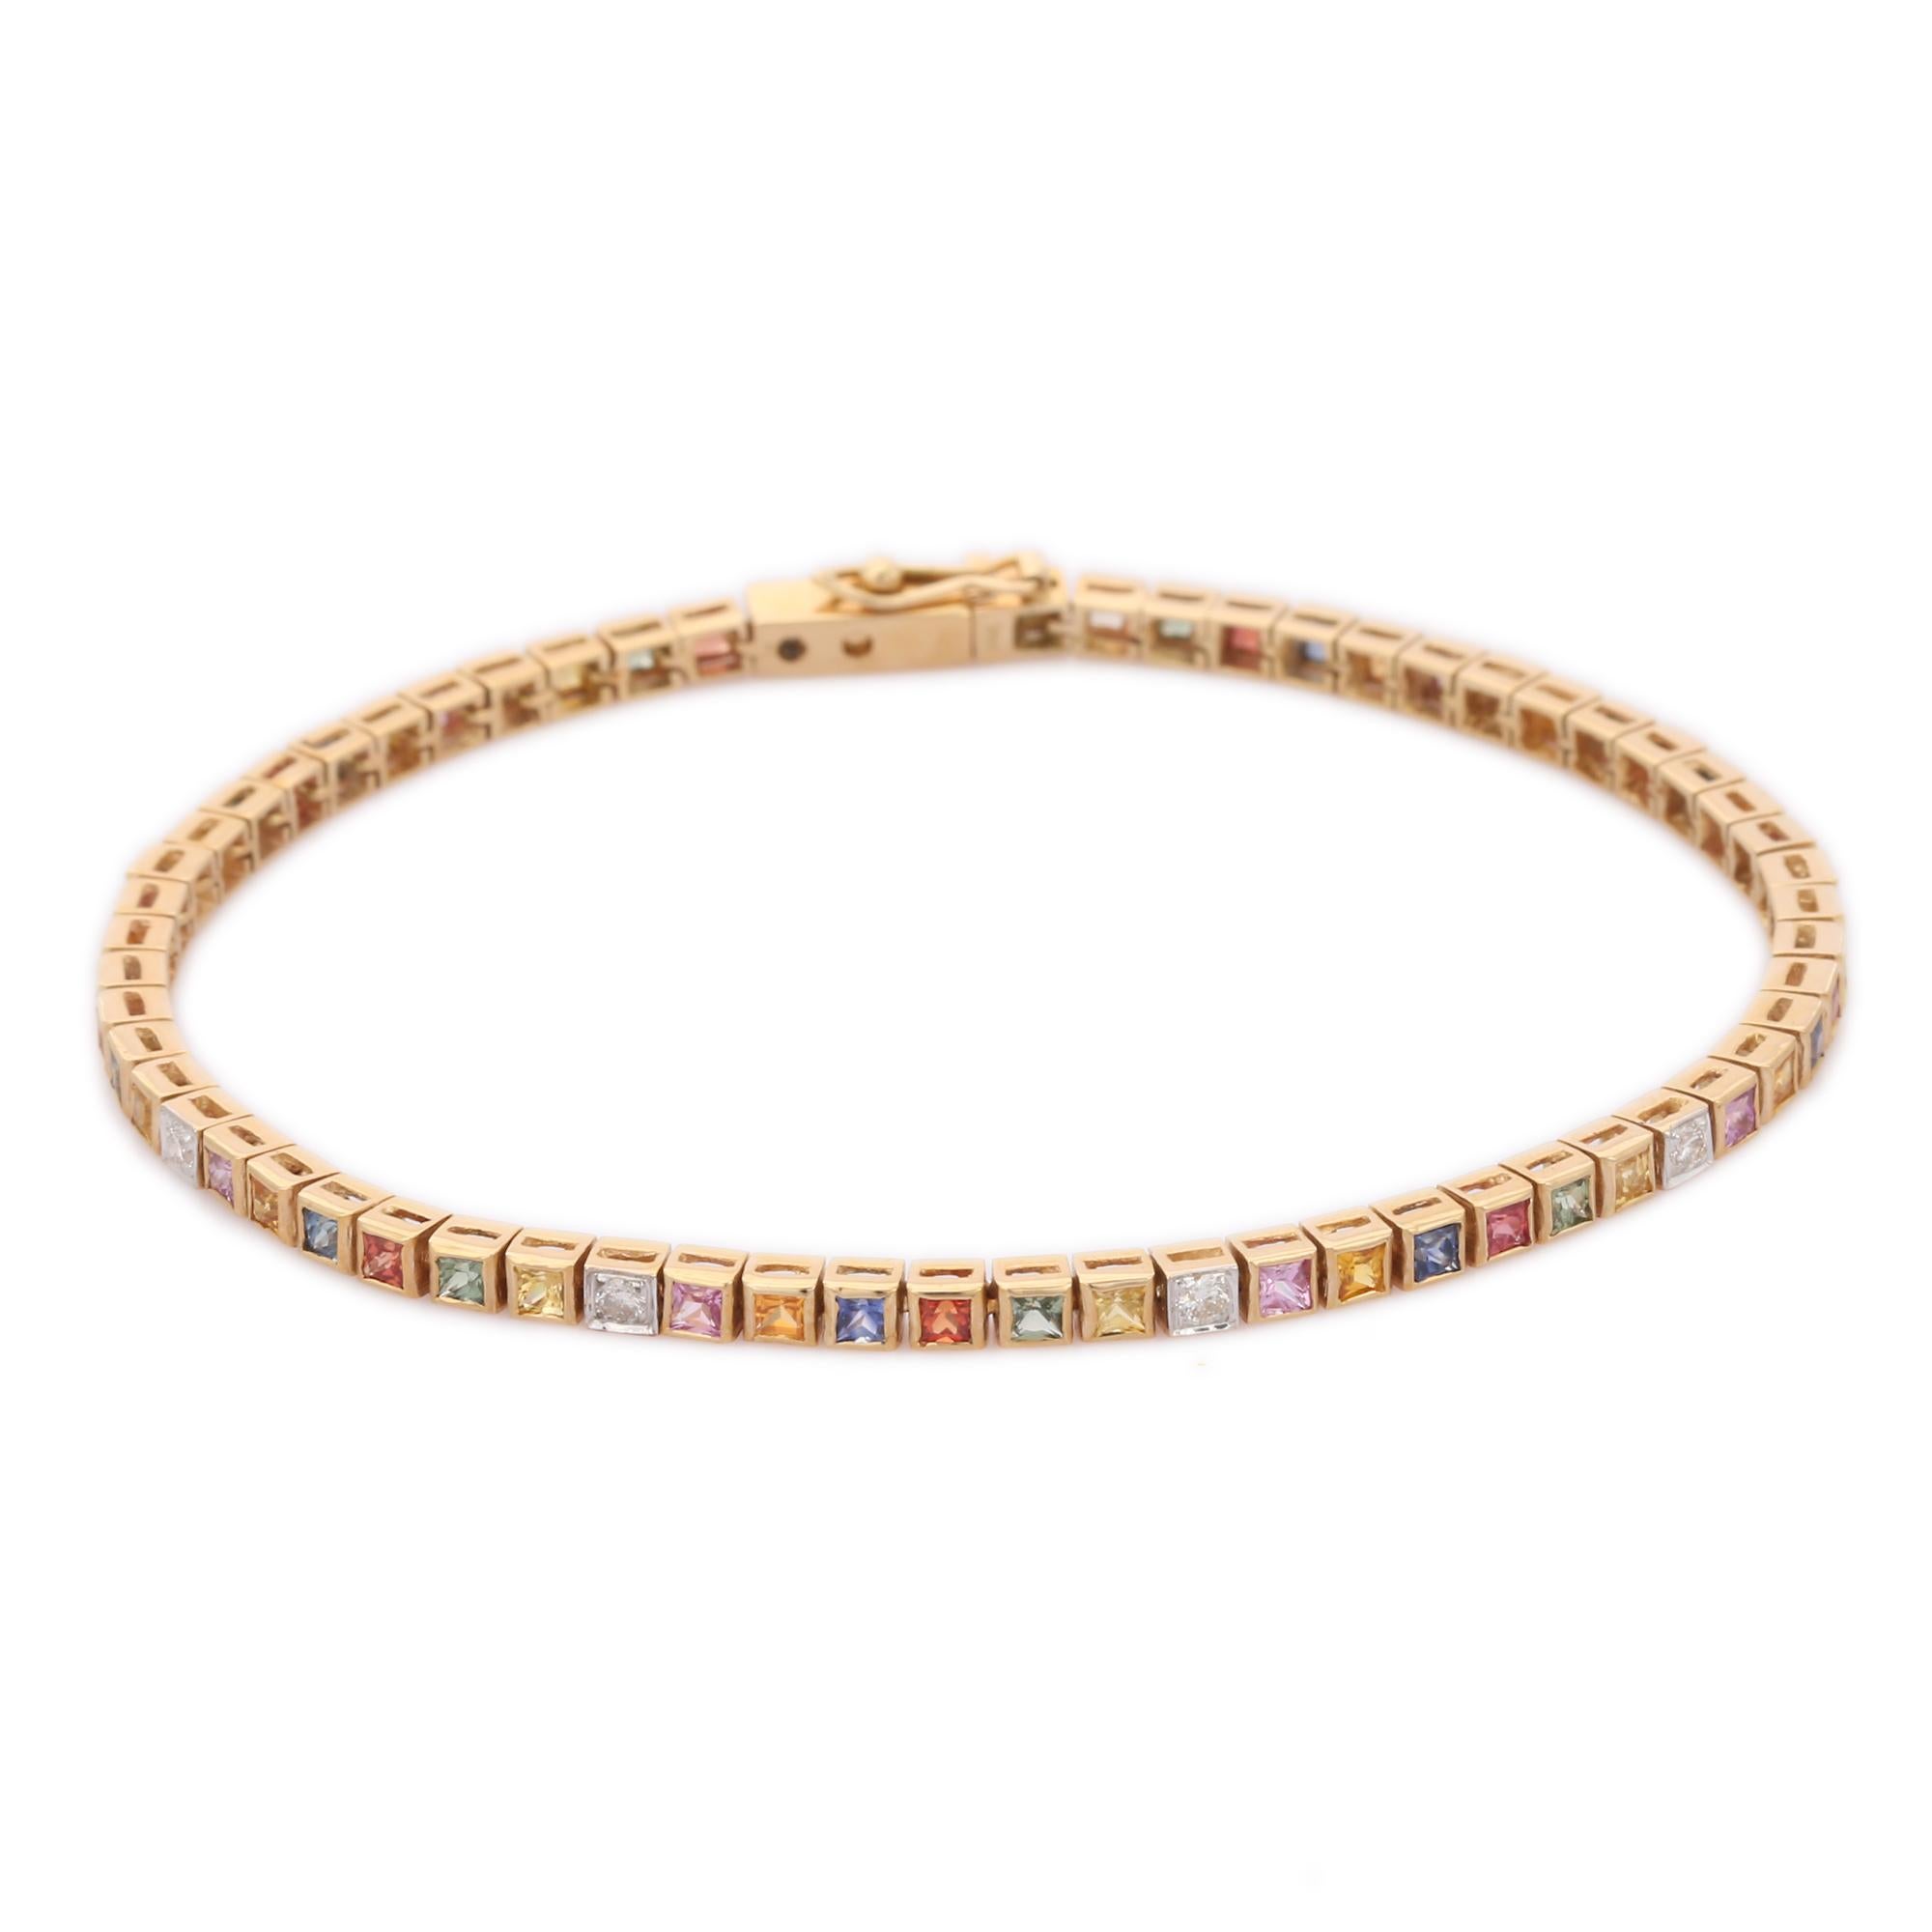 This Square Cut Multi Sapphire Tennis Bracelet in 14K gold showcases 54 endlessly sparkling natural multi sapphire, weighing 3.69 carats and 9 pieces of diamonds weighing 0.27 carat. It measures 7.25 inches long in length. 
Sapphire stimulate